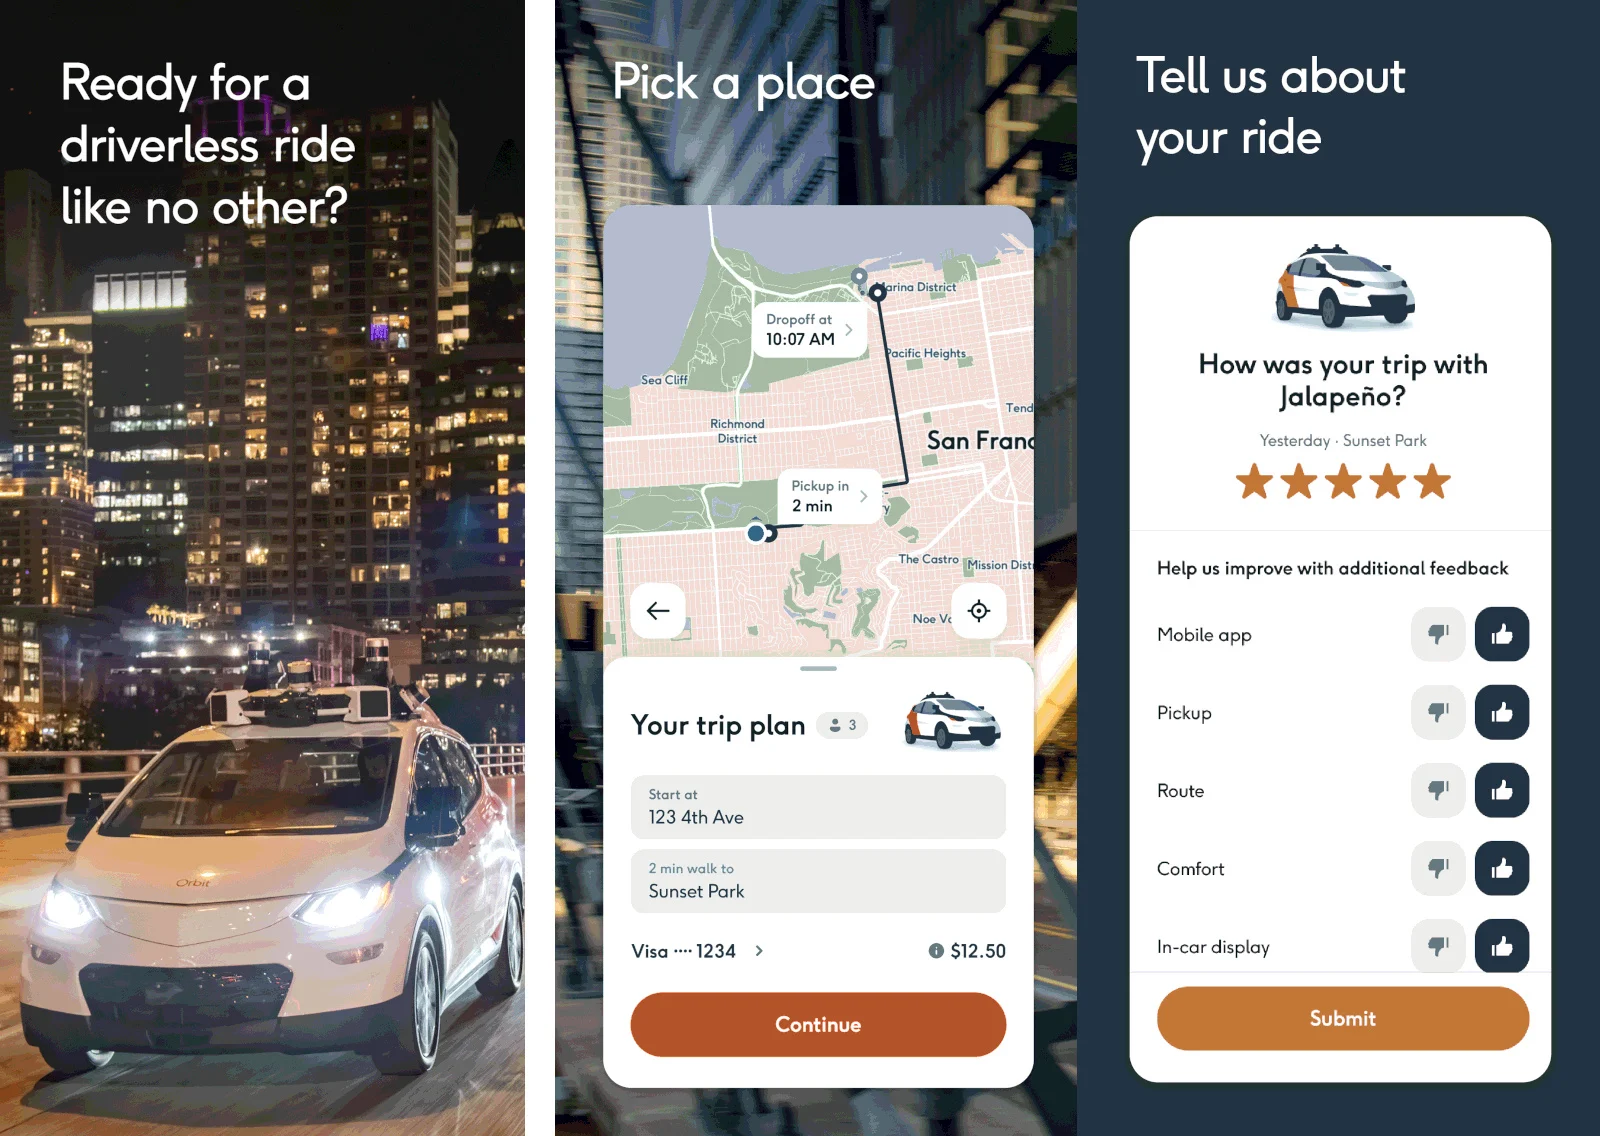 Photos of a car, a map showing a trip plan's pickup and drop off, and a rating page asking the use to rate a trip with a ride-hailing service. 